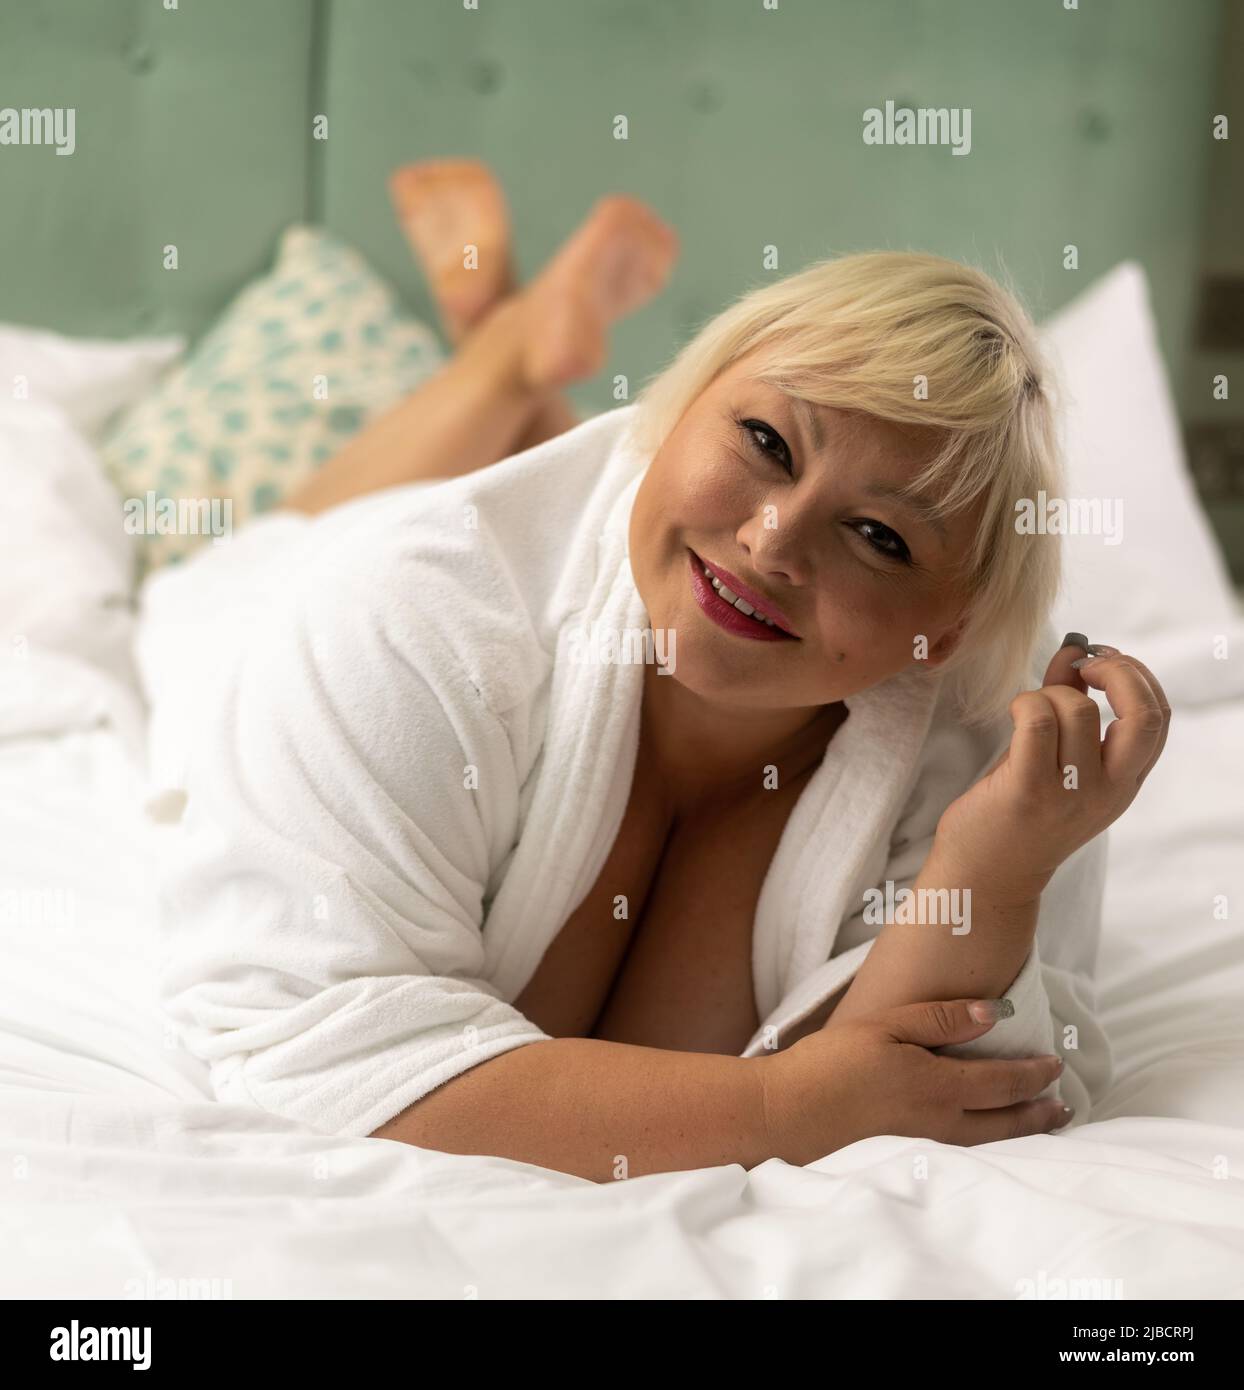 Luxury lifestyle shoot with body positive plus sized female model with white robe on king sized bed Stock Photo